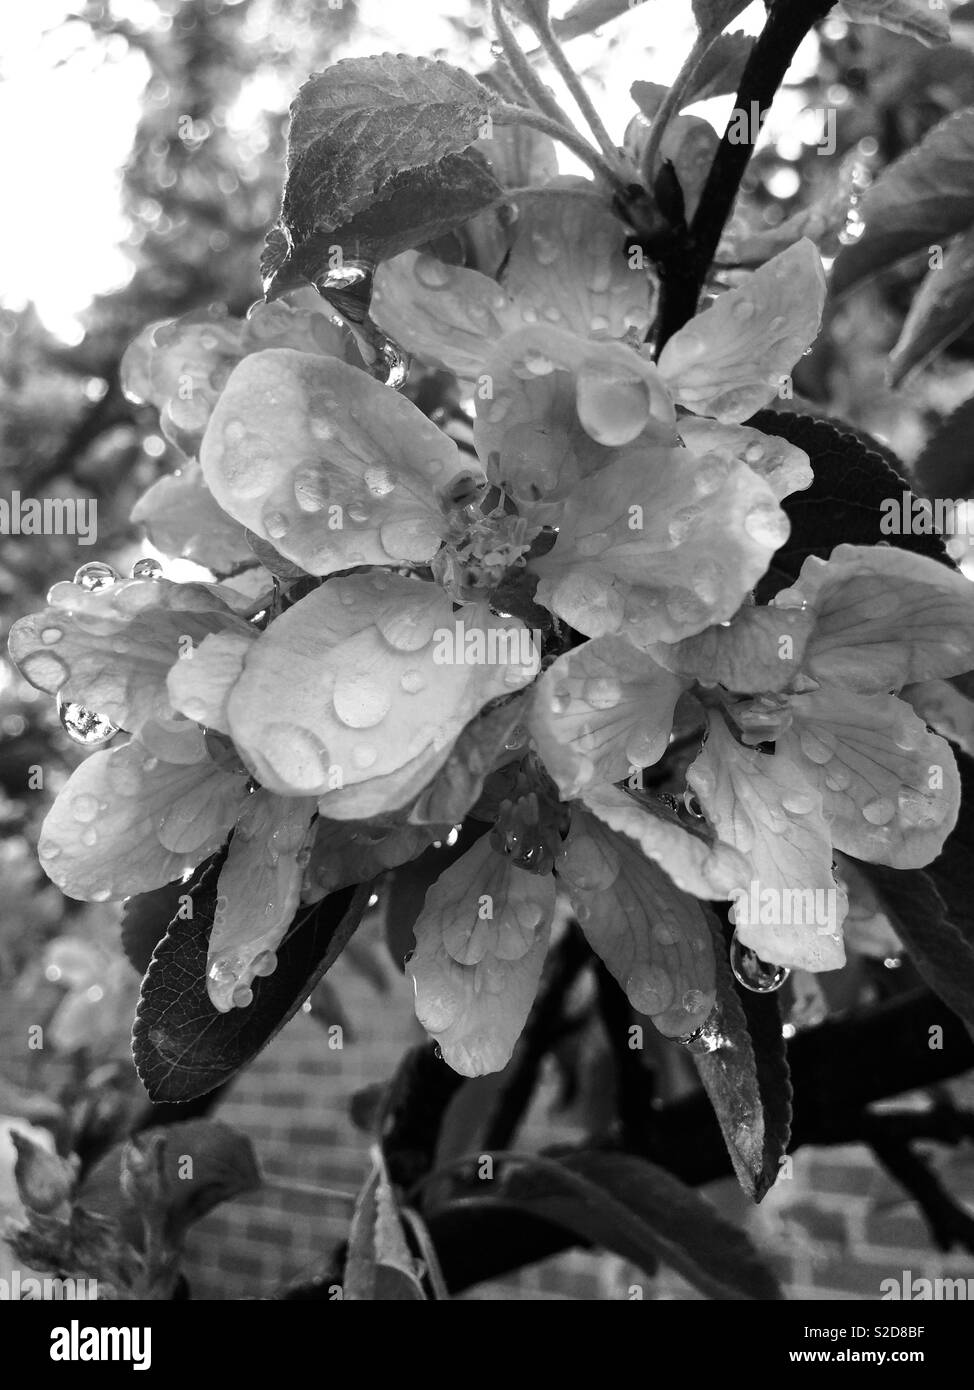 A black a white picture with flowers and water droplets Stock Photo